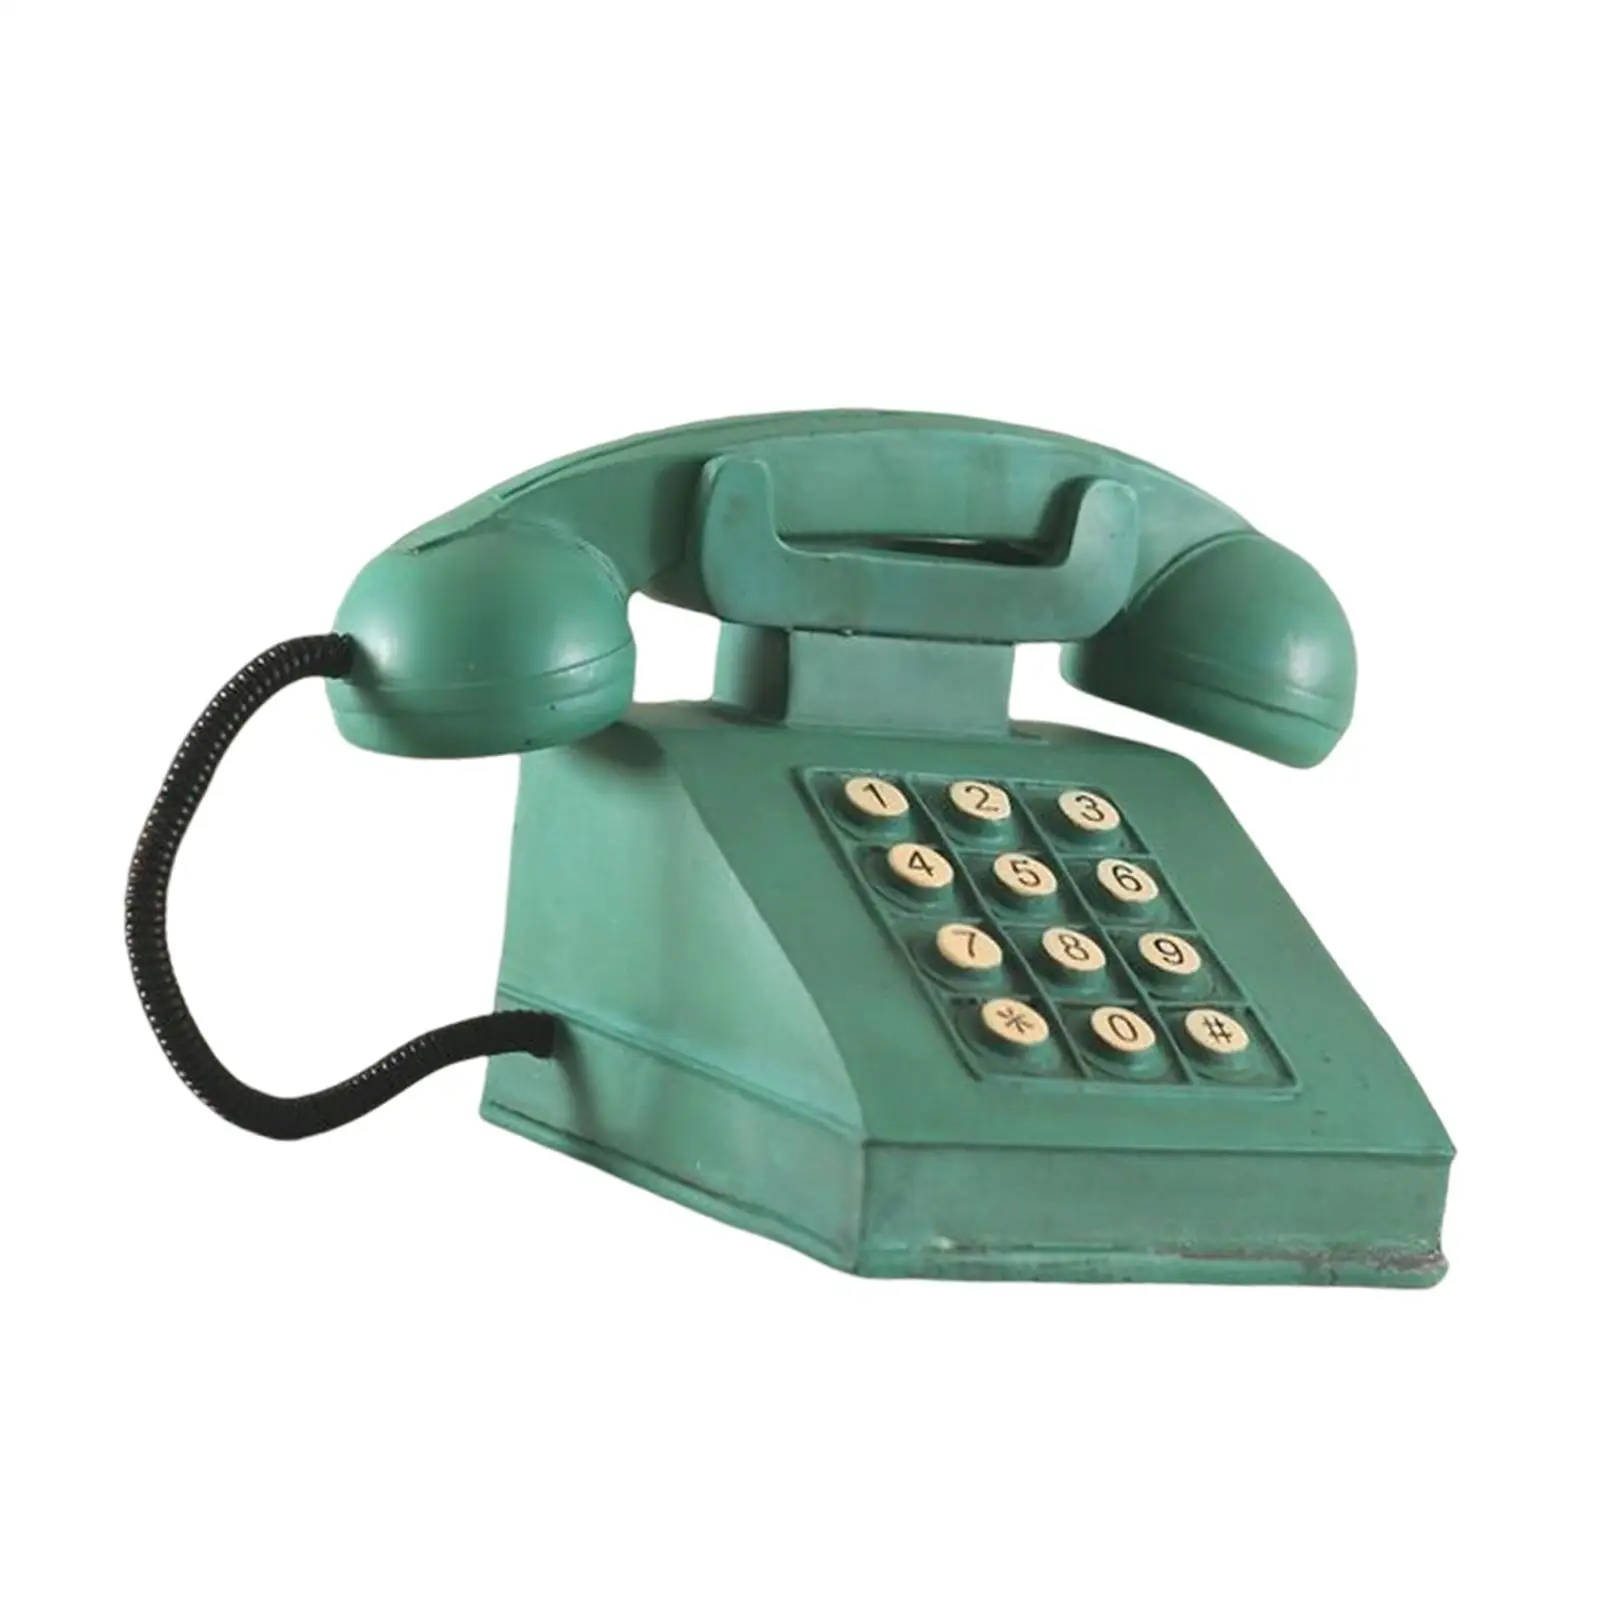 Classic American Telephone Model Statue Resin Craft for Hotel Bedroom Bar Decor